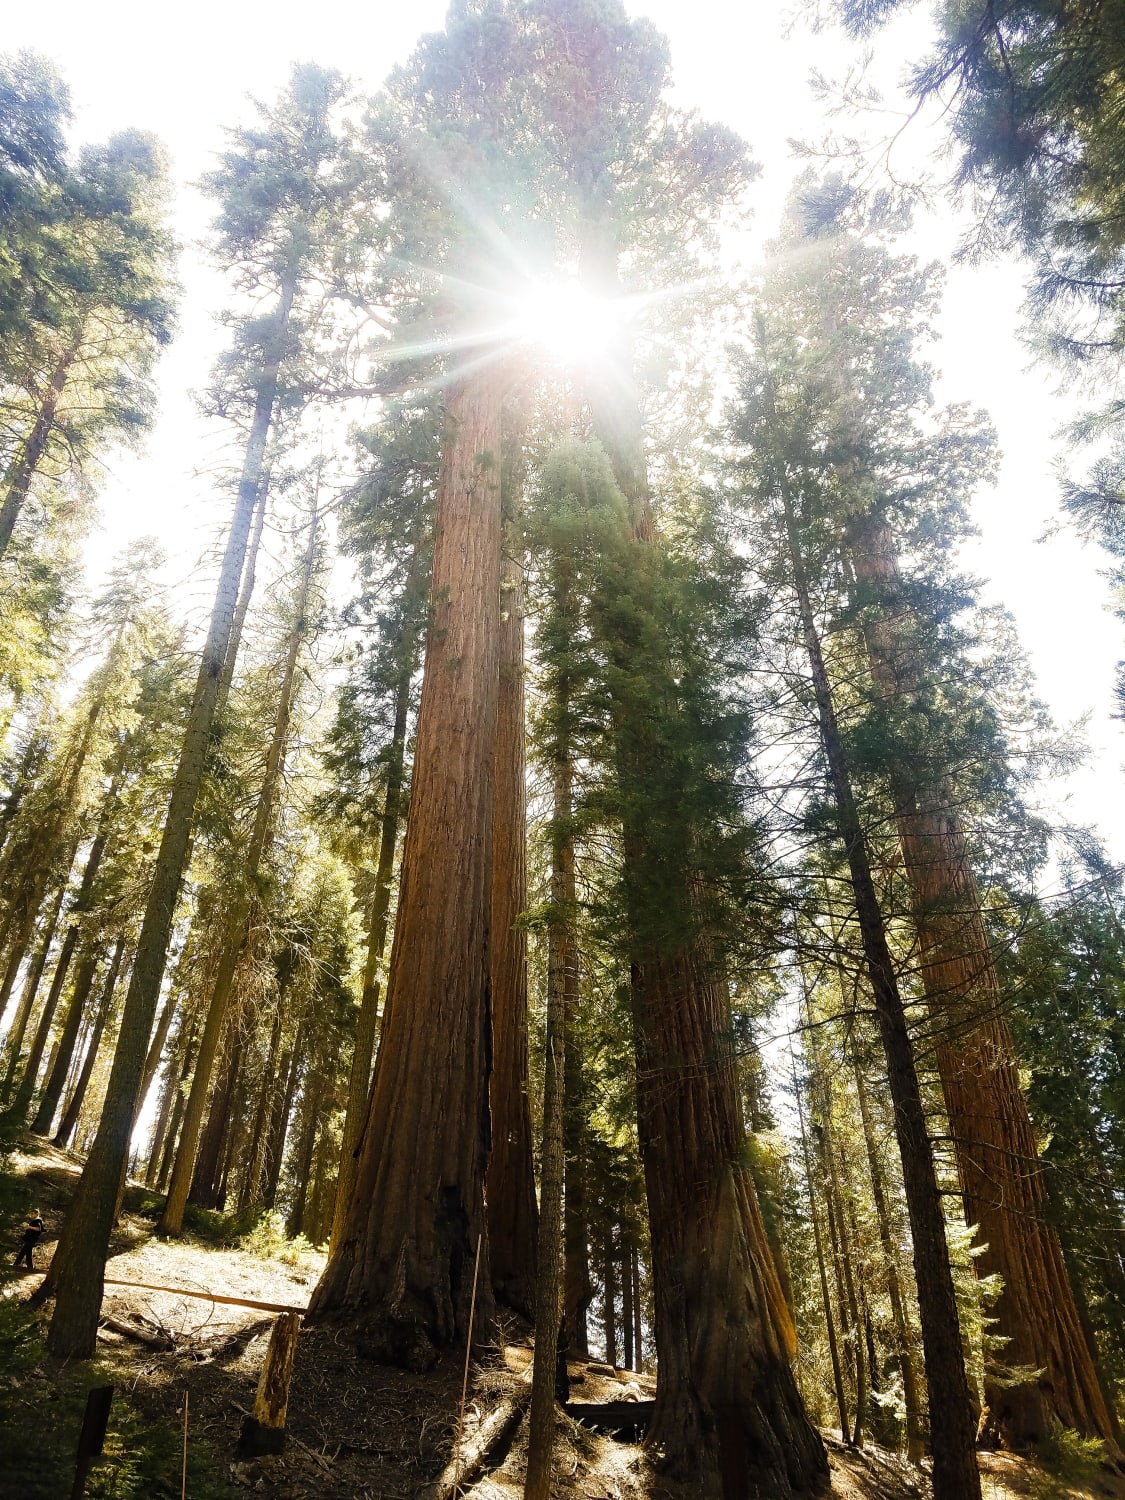 It never gets old looking at the gigantic trees of Sequoia National Park